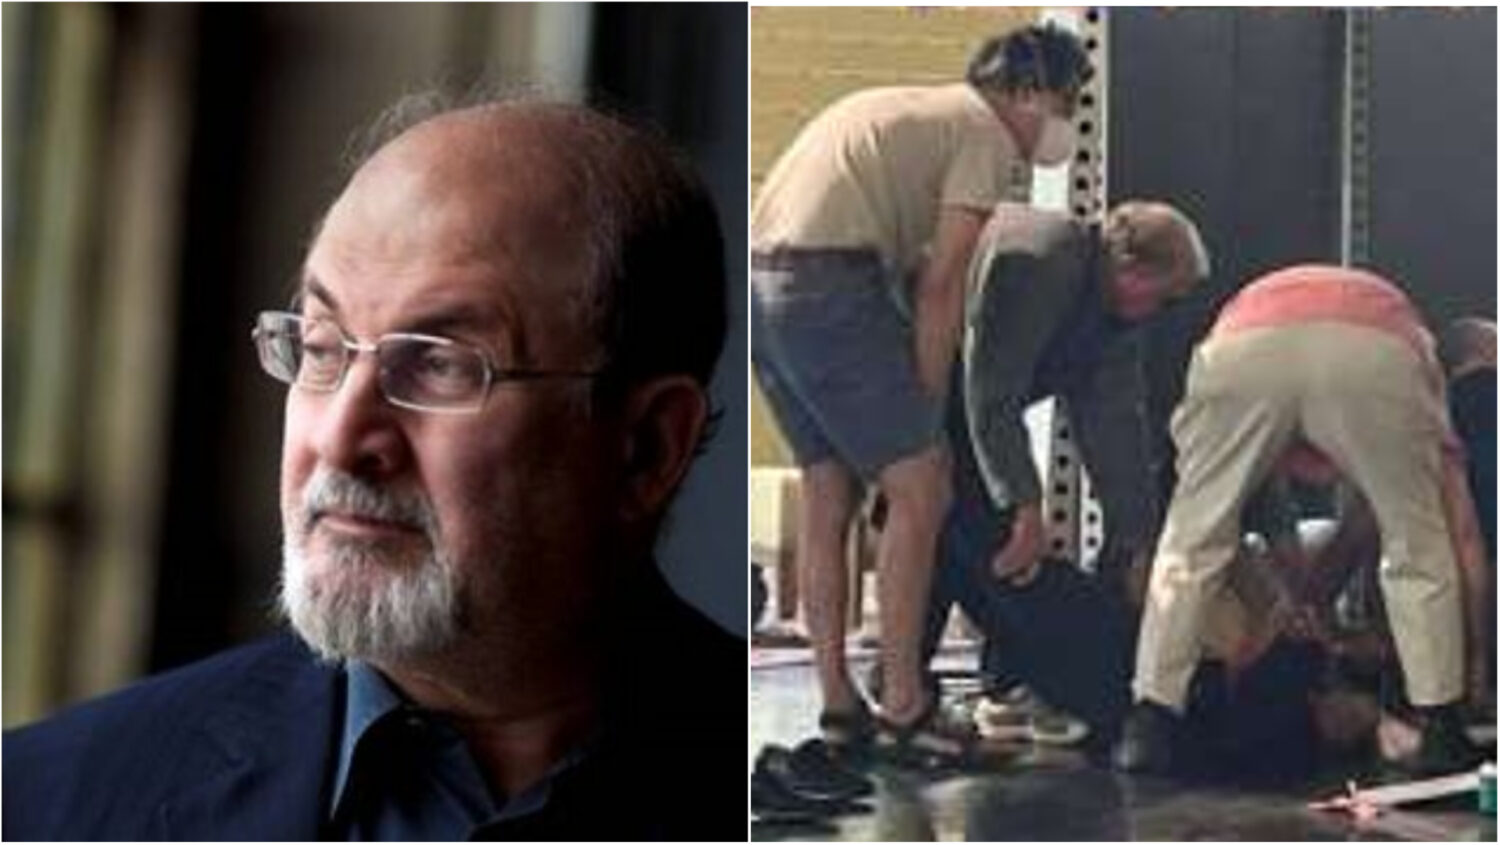 75-year-old Salman Rushdie was flown to a hospital and underwent surgery. So far, doctors believe that he is critical but “recoverable”.